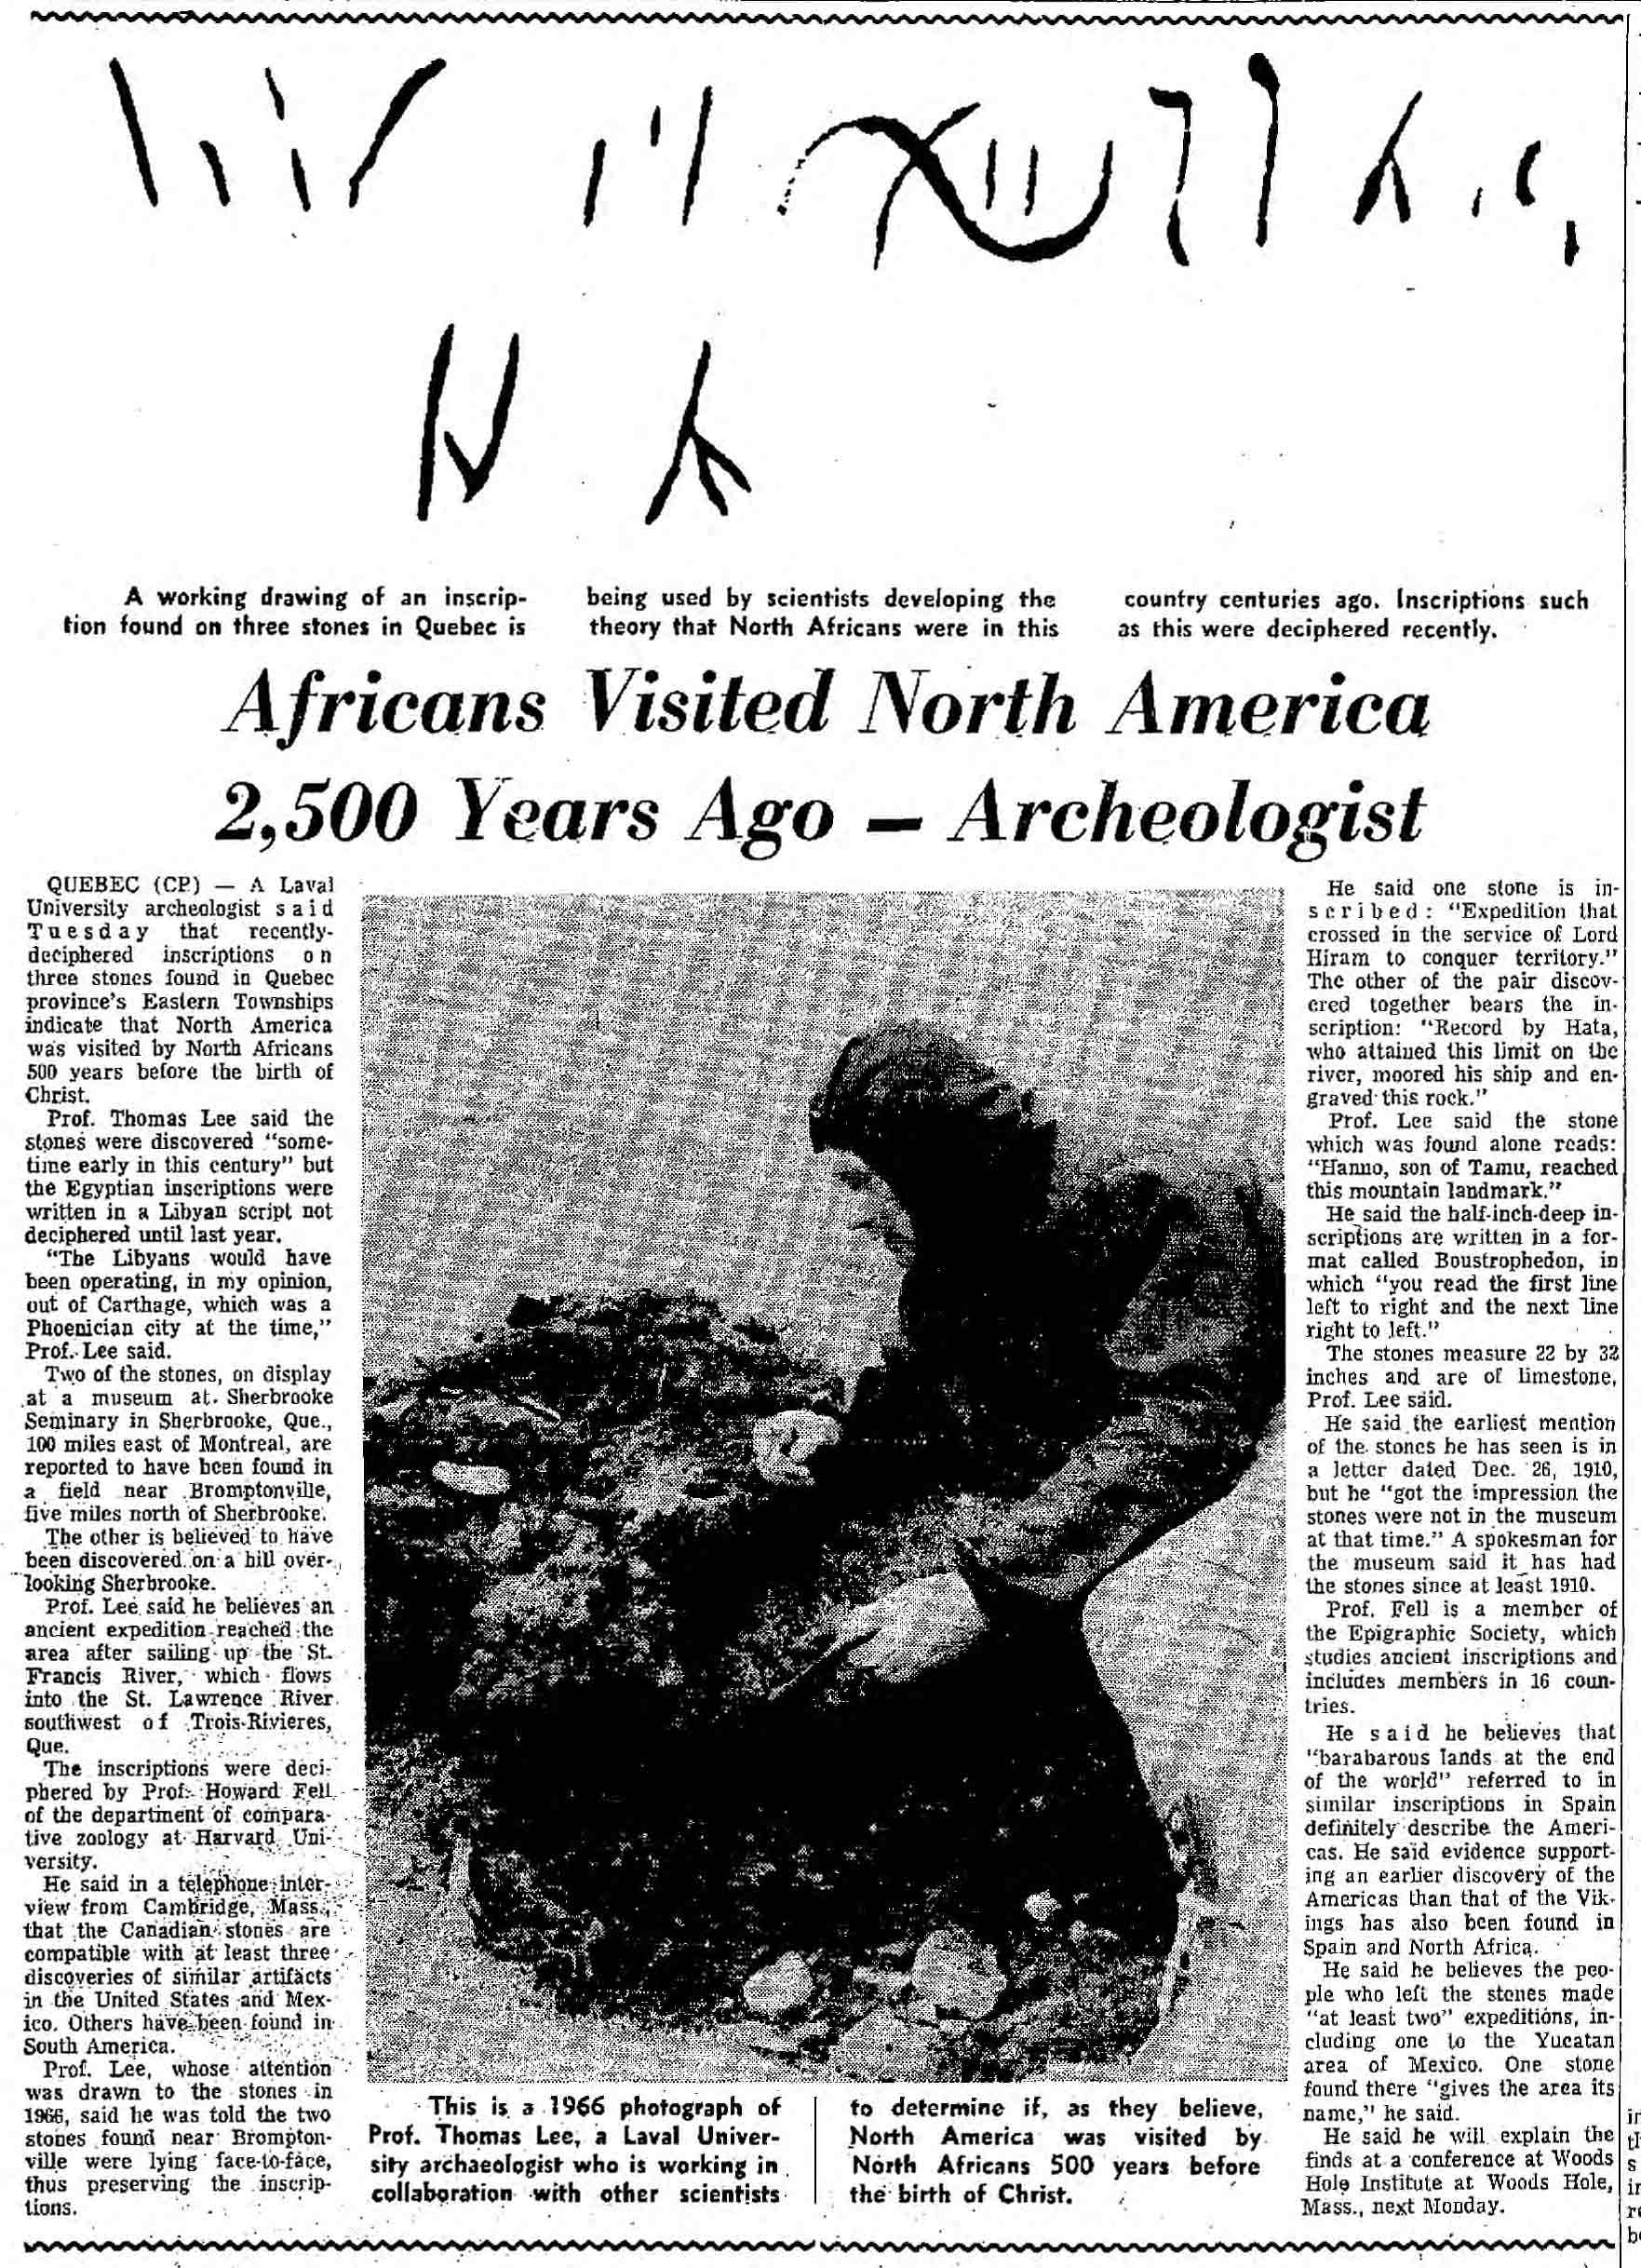 Africans visited North America 2500 years ago